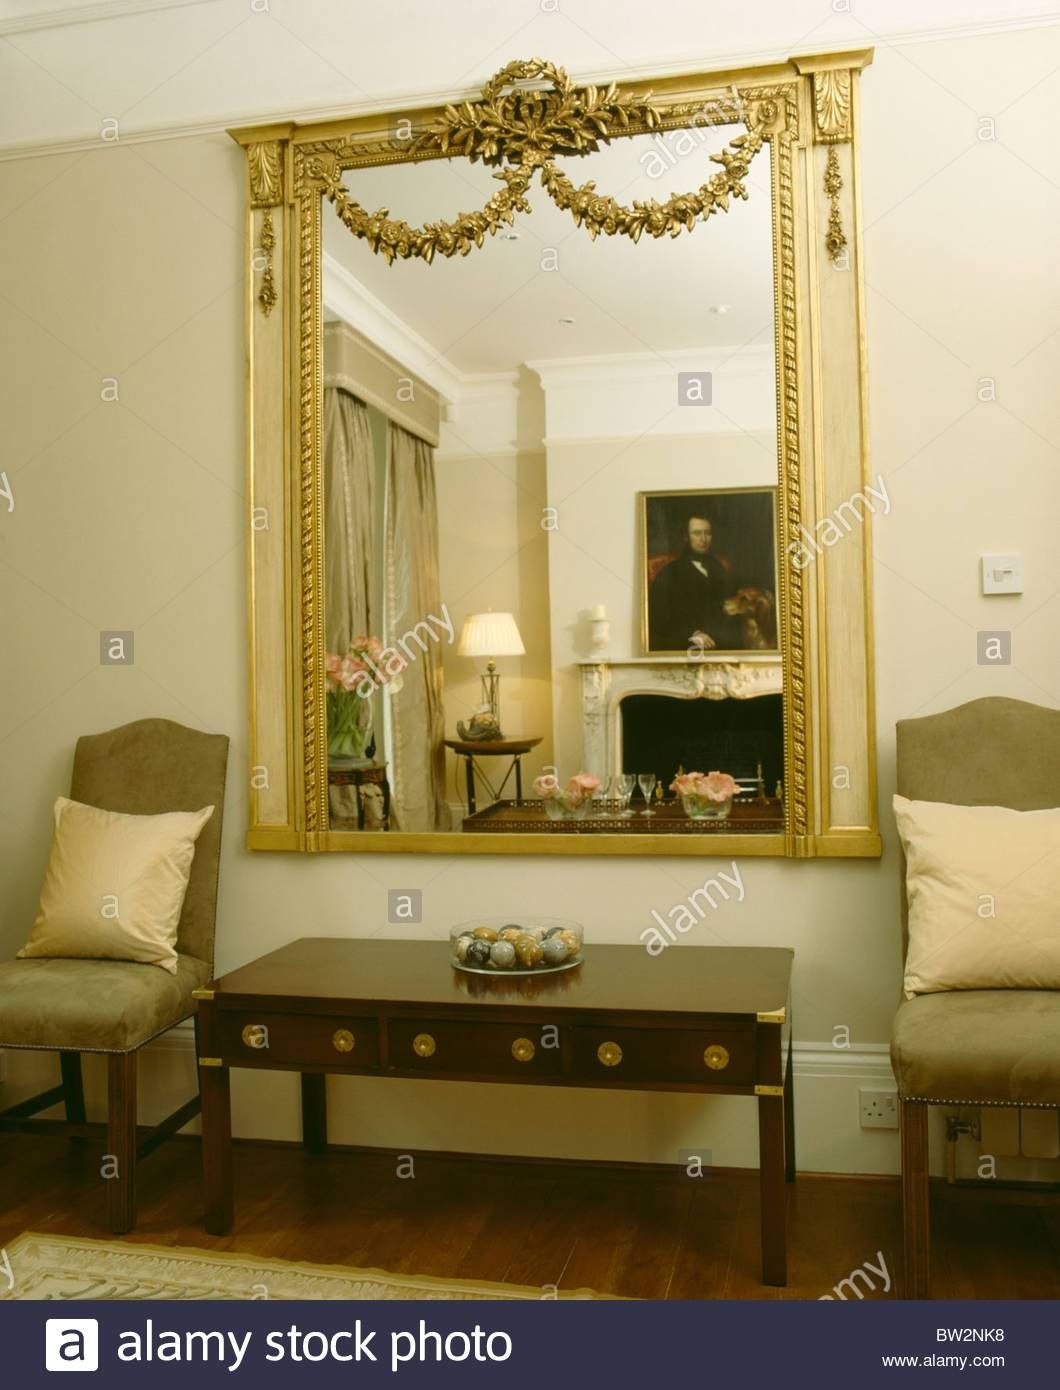 Large Ornate Gilt Antique Mirror On Wall Above Console Table In In Ornate Gilt Mirrors (View 2 of 15)